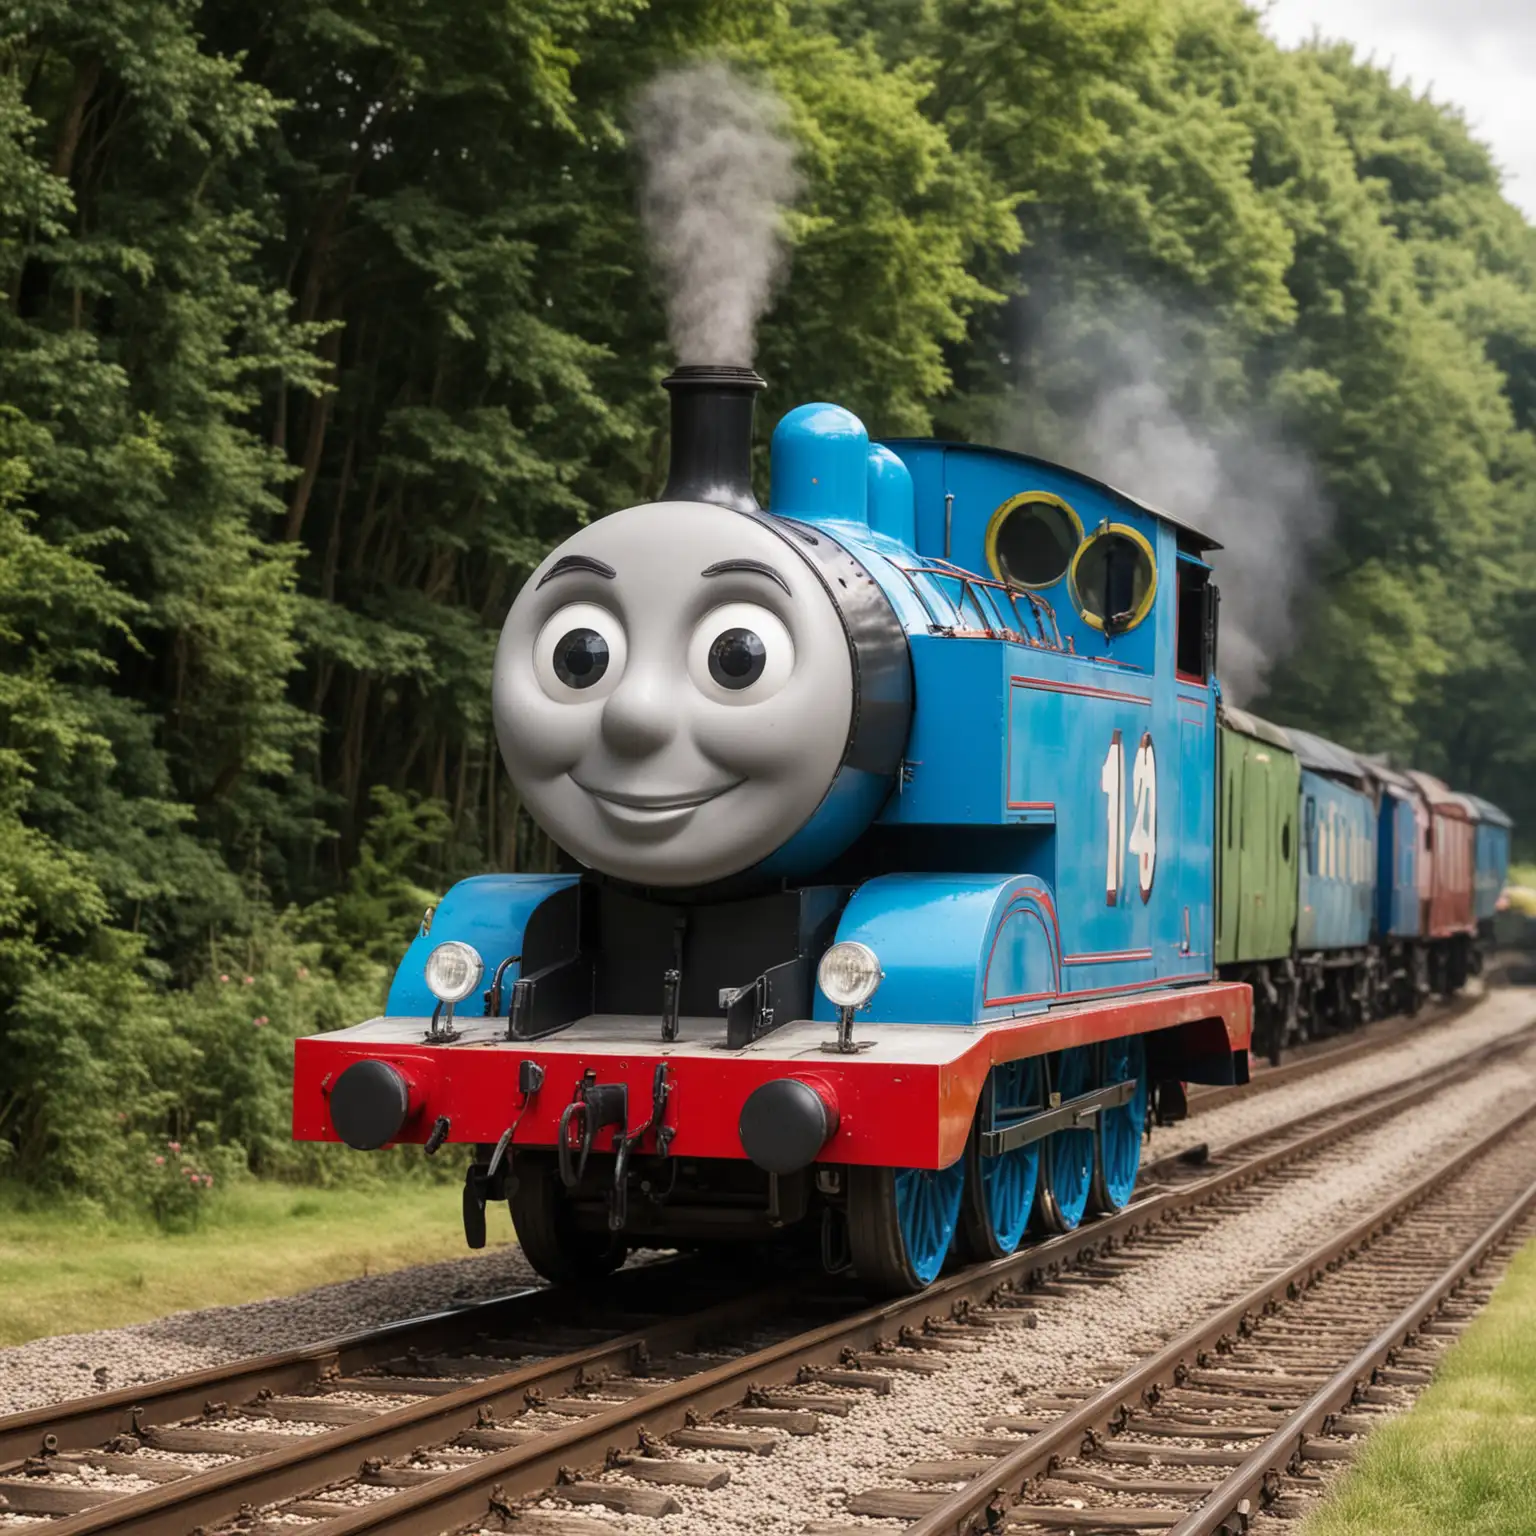 Thomas the Tank Engine Adventures in a Colorful Railway World